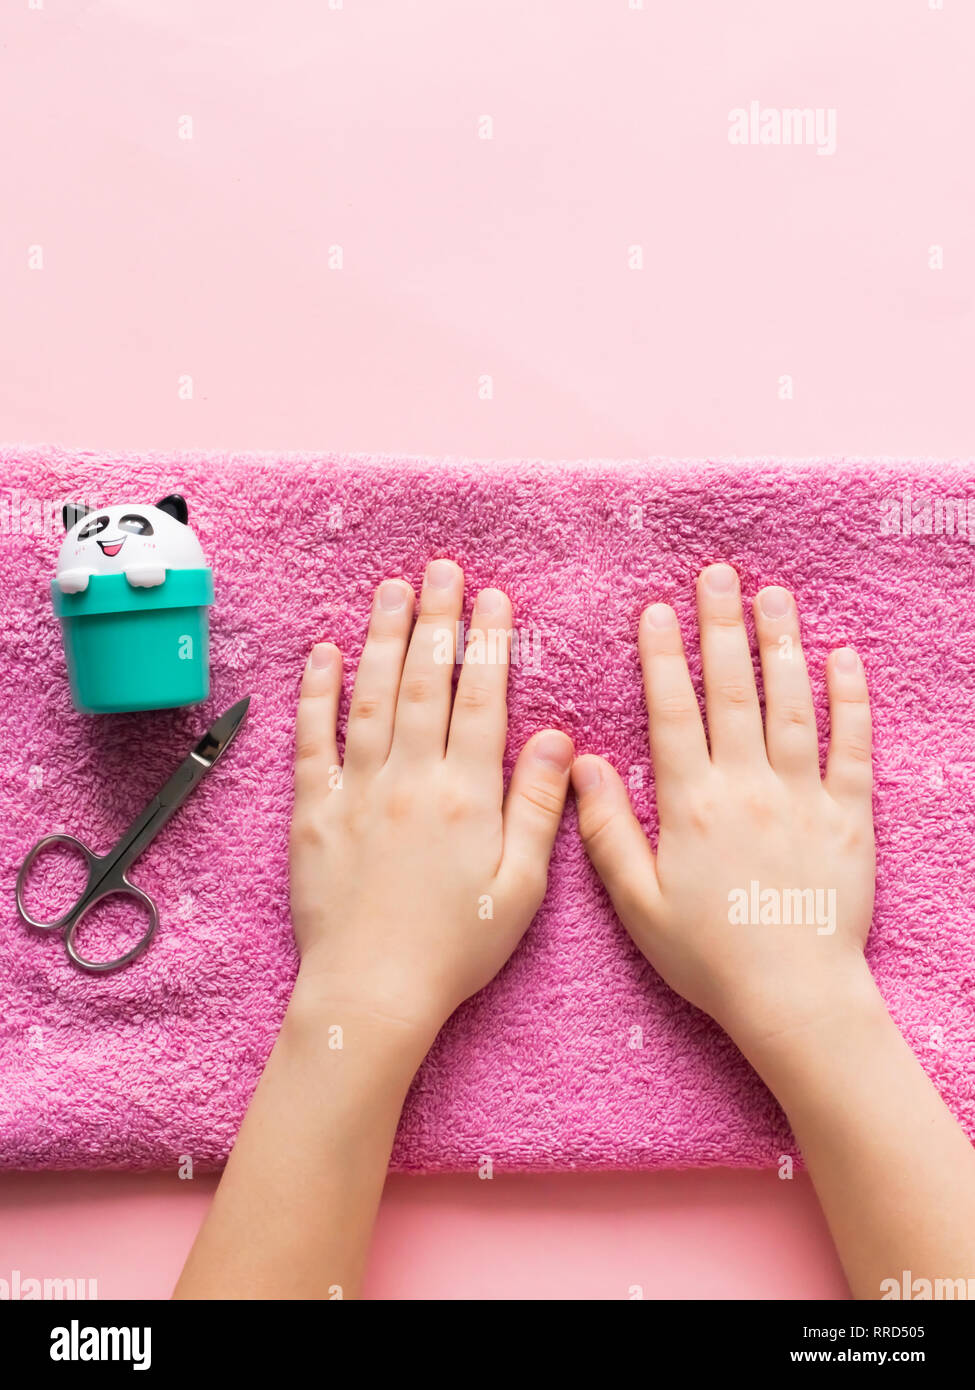 https://c8.alamy.com/comp/RRD505/spa-treatments-for-hand-skin-and-nails-for-children-young-girls-hands-are-on-pink-soft-towel-beauty-and-care-concept-RRD505.jpg